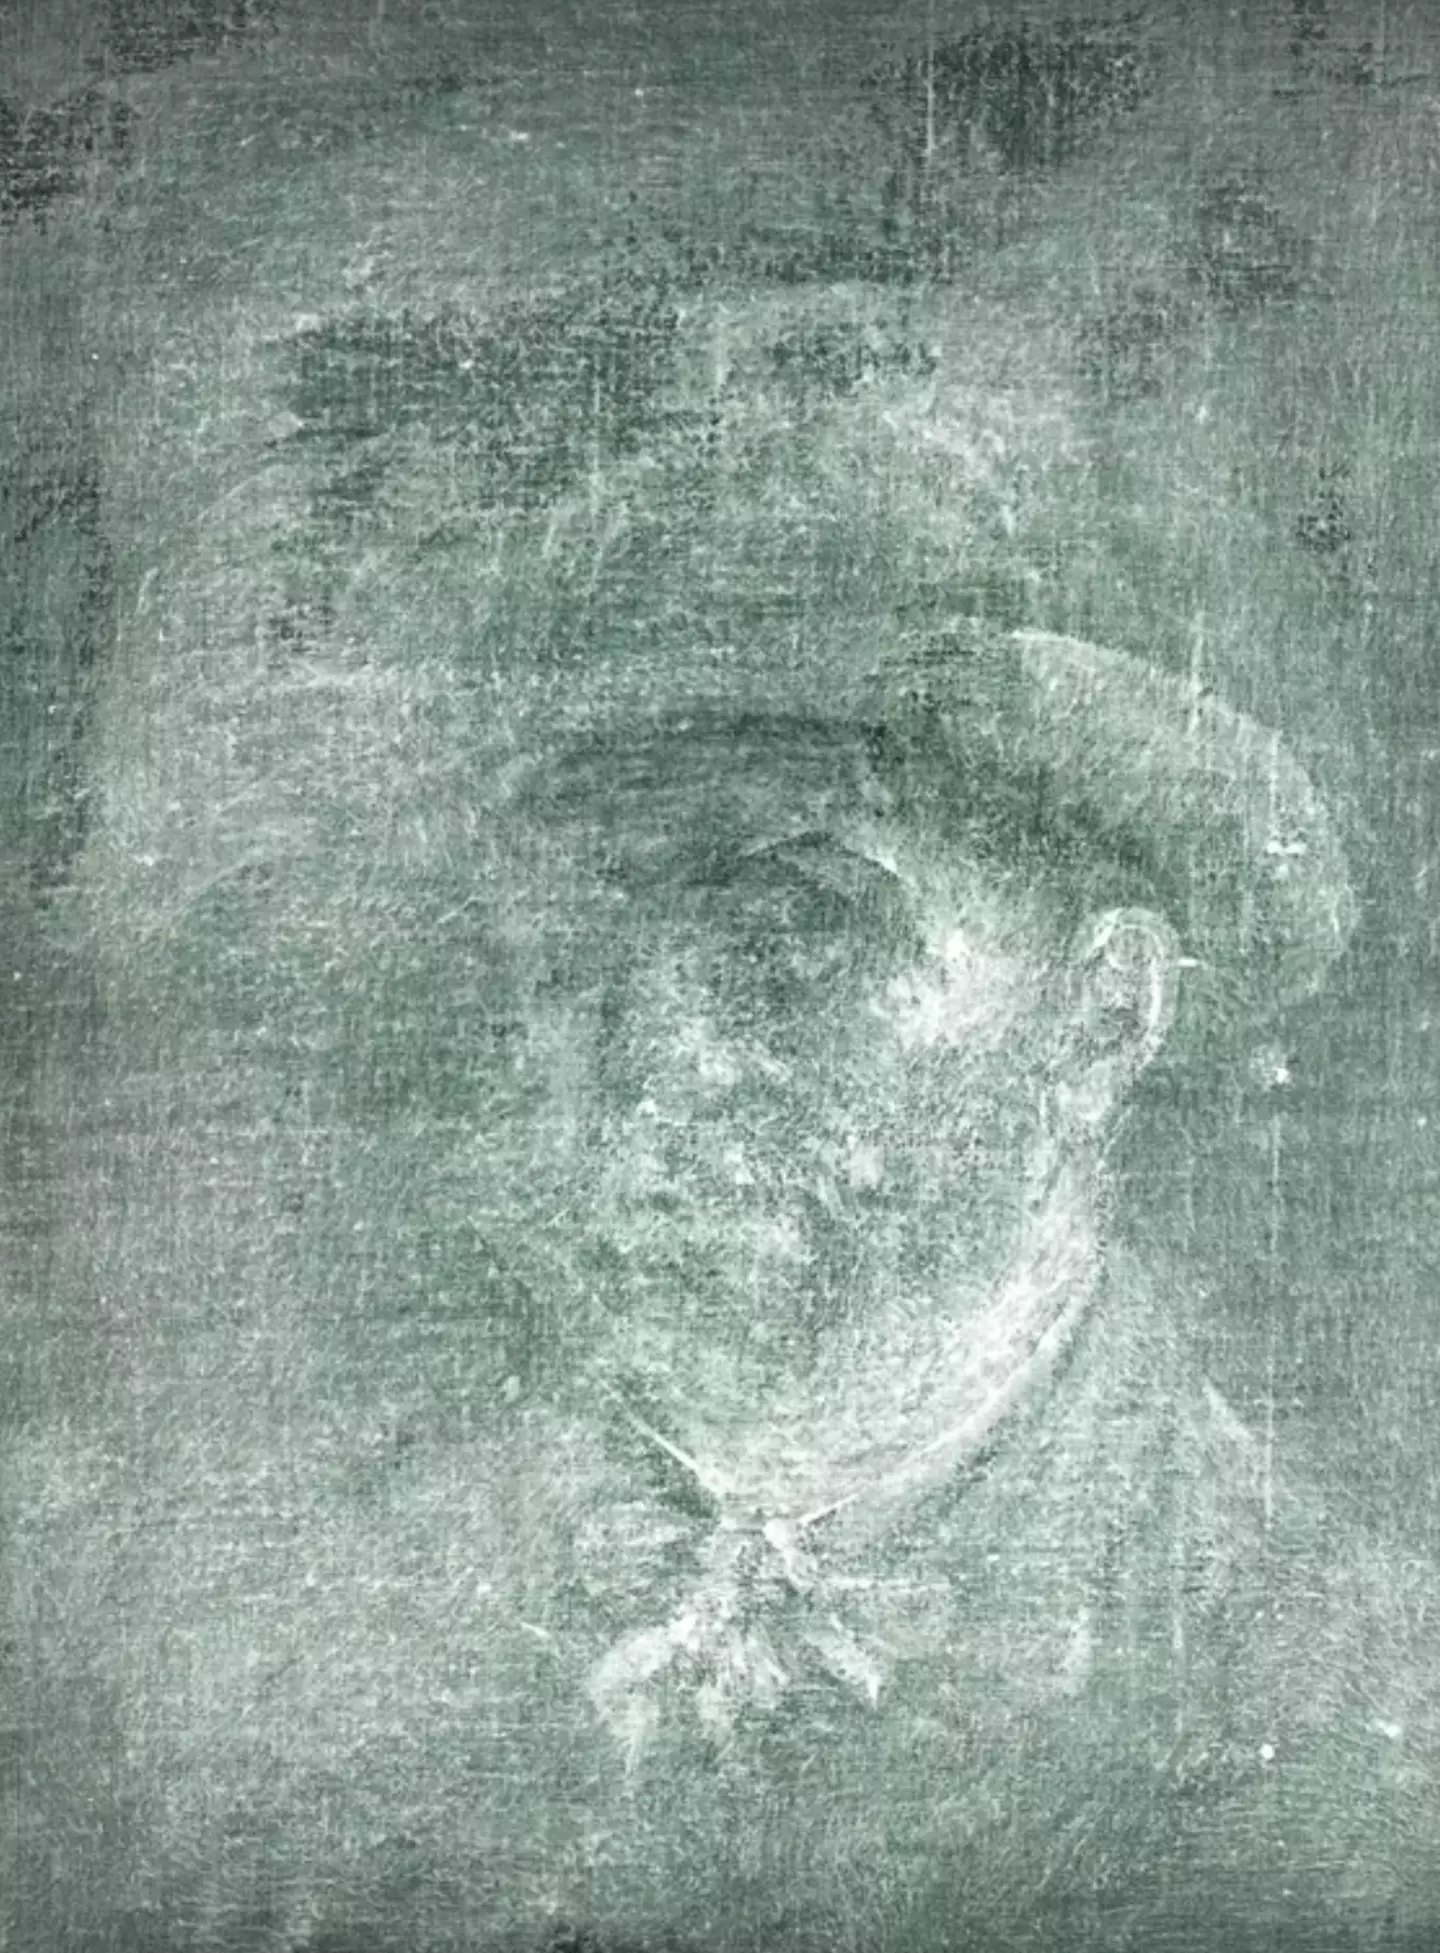 A new Vincent Van Gogh self-portrait has been discovered etched onto the back of one of his famous paintings.